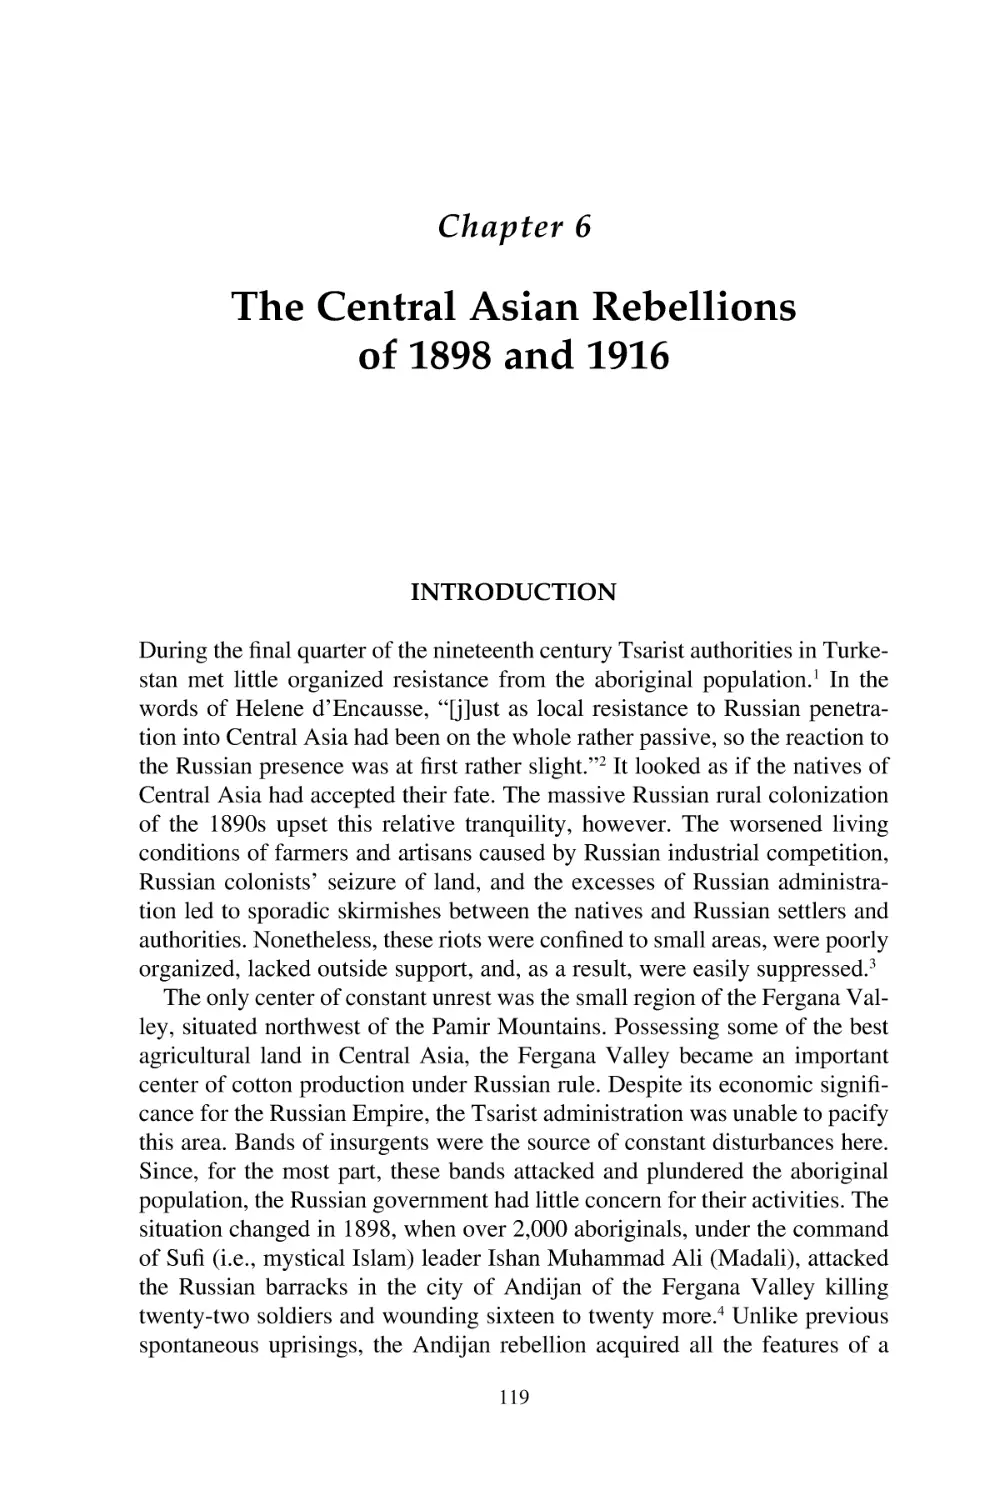 6. The Central Asian Rebellions of 1898 and 1916